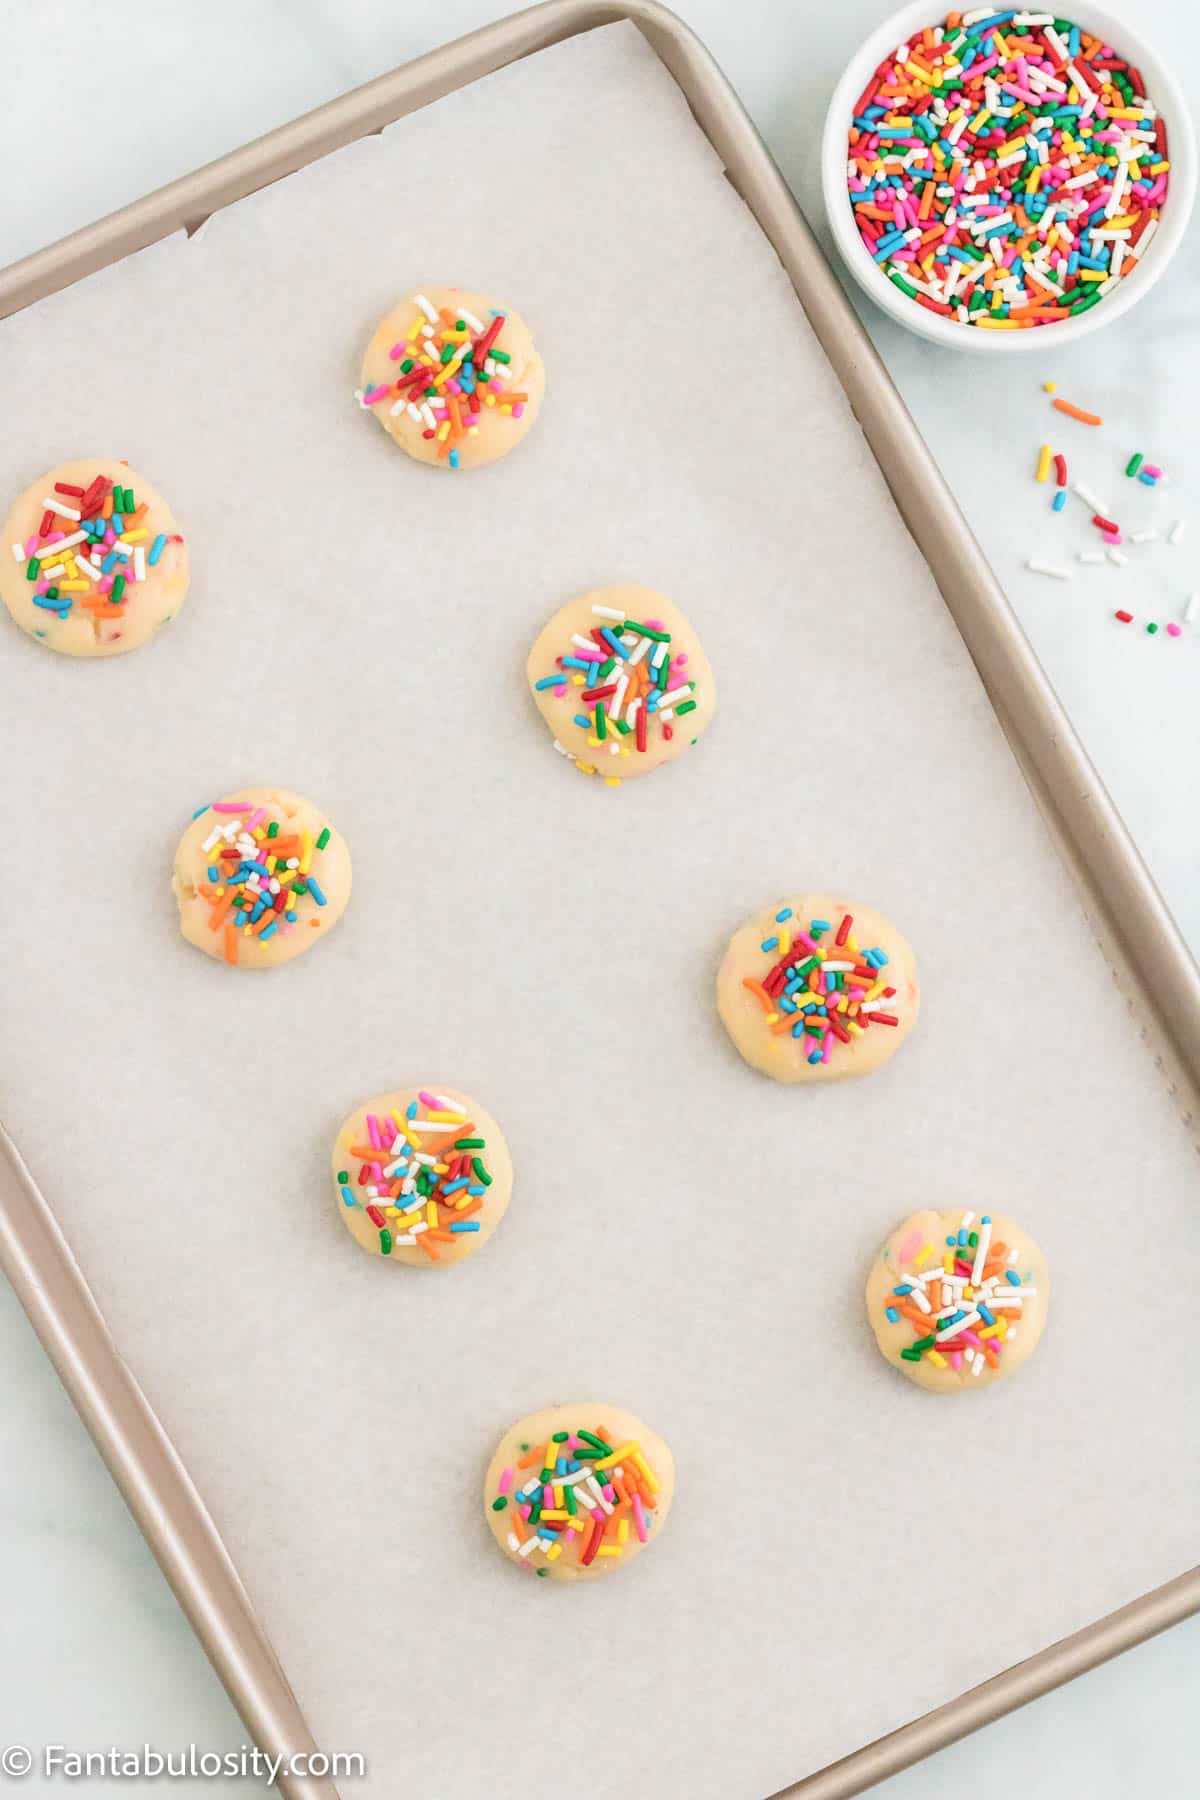 Uncooked balls of funfetti cake mix cookies on a parchment lined baking sheet.